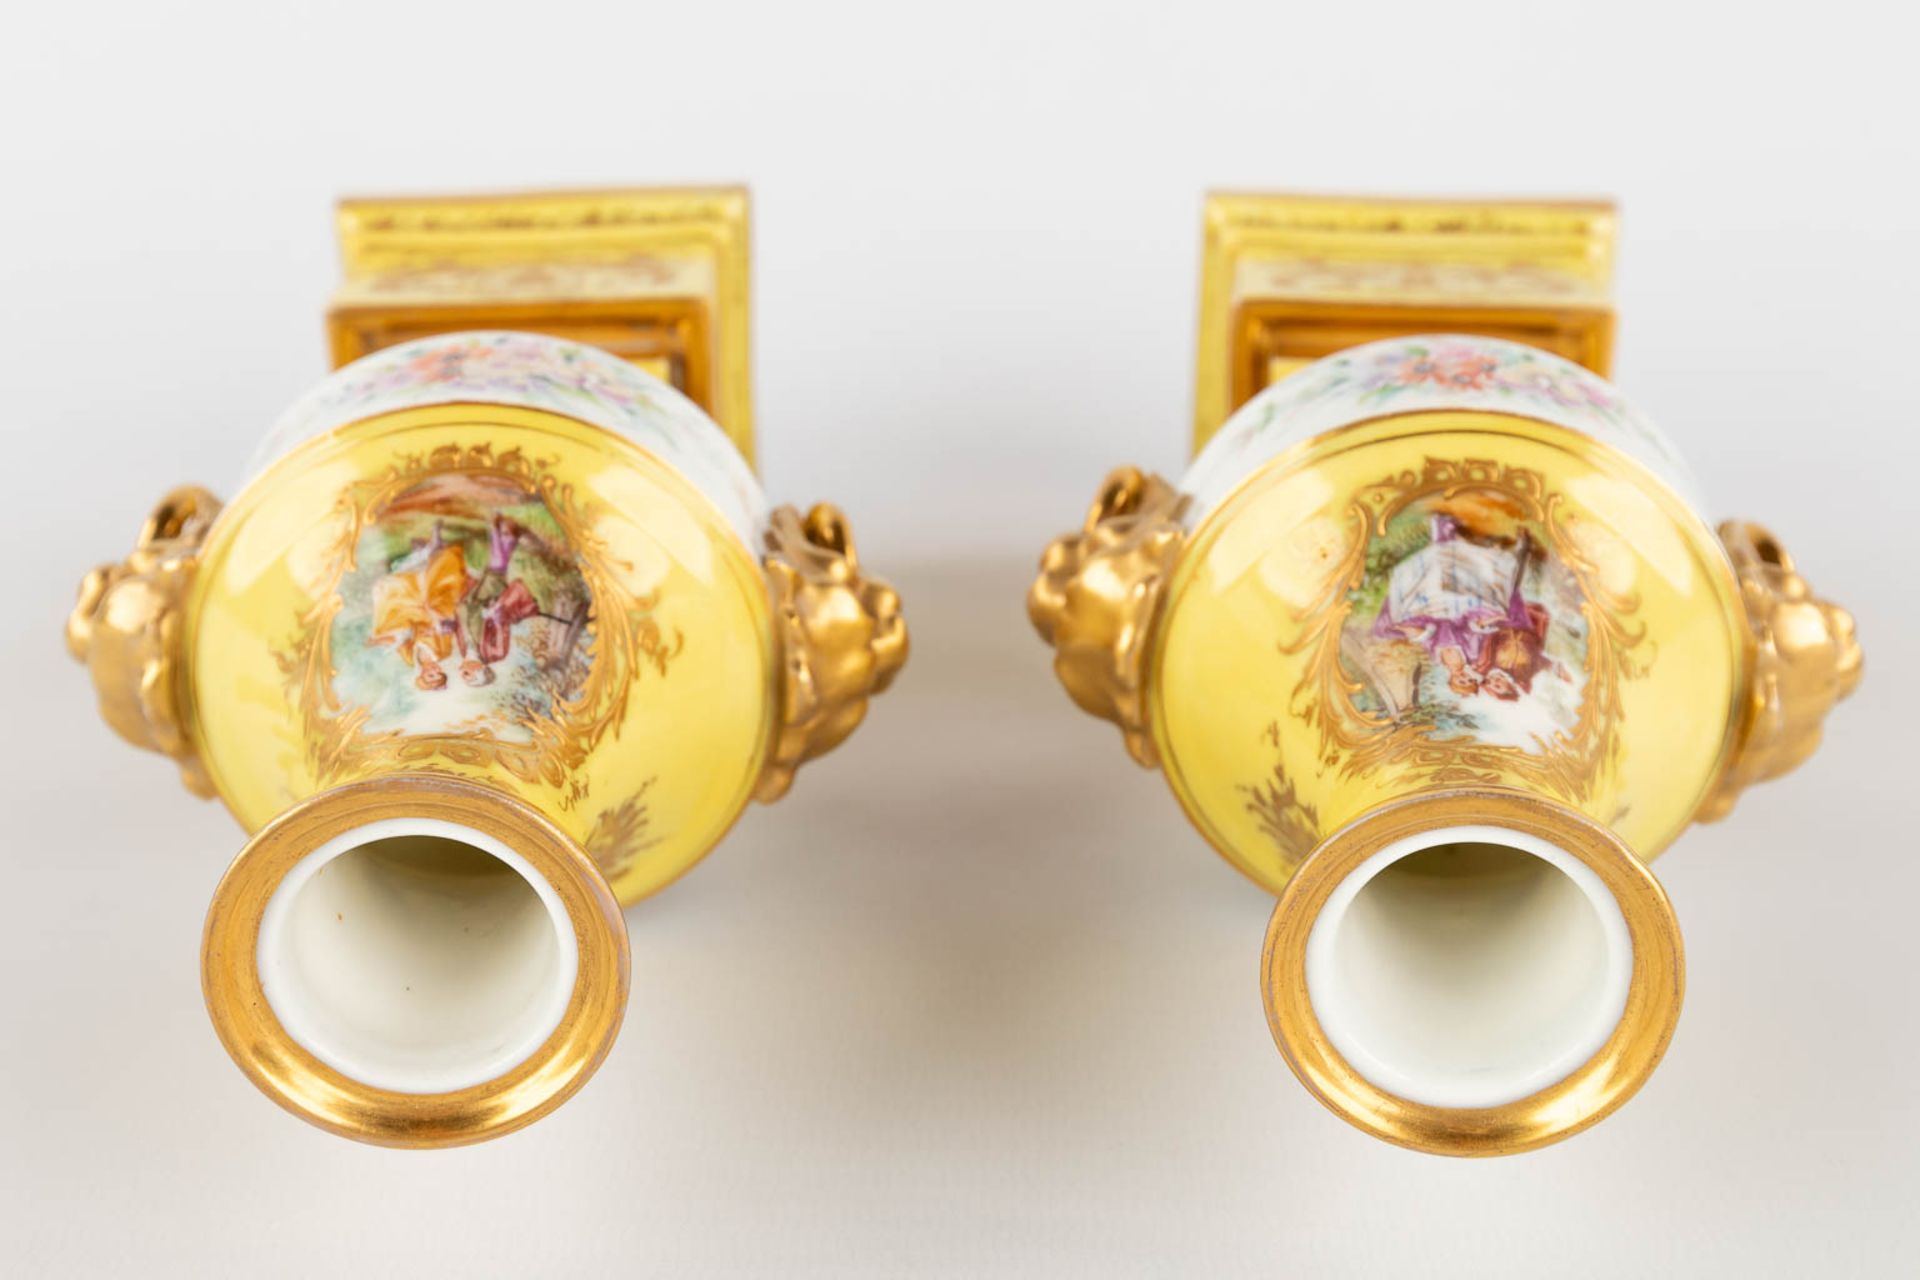 A pair of antique, hand-painted porcelain vases, yellow glaze and flower with lion's heads decor. (L - Image 10 of 16